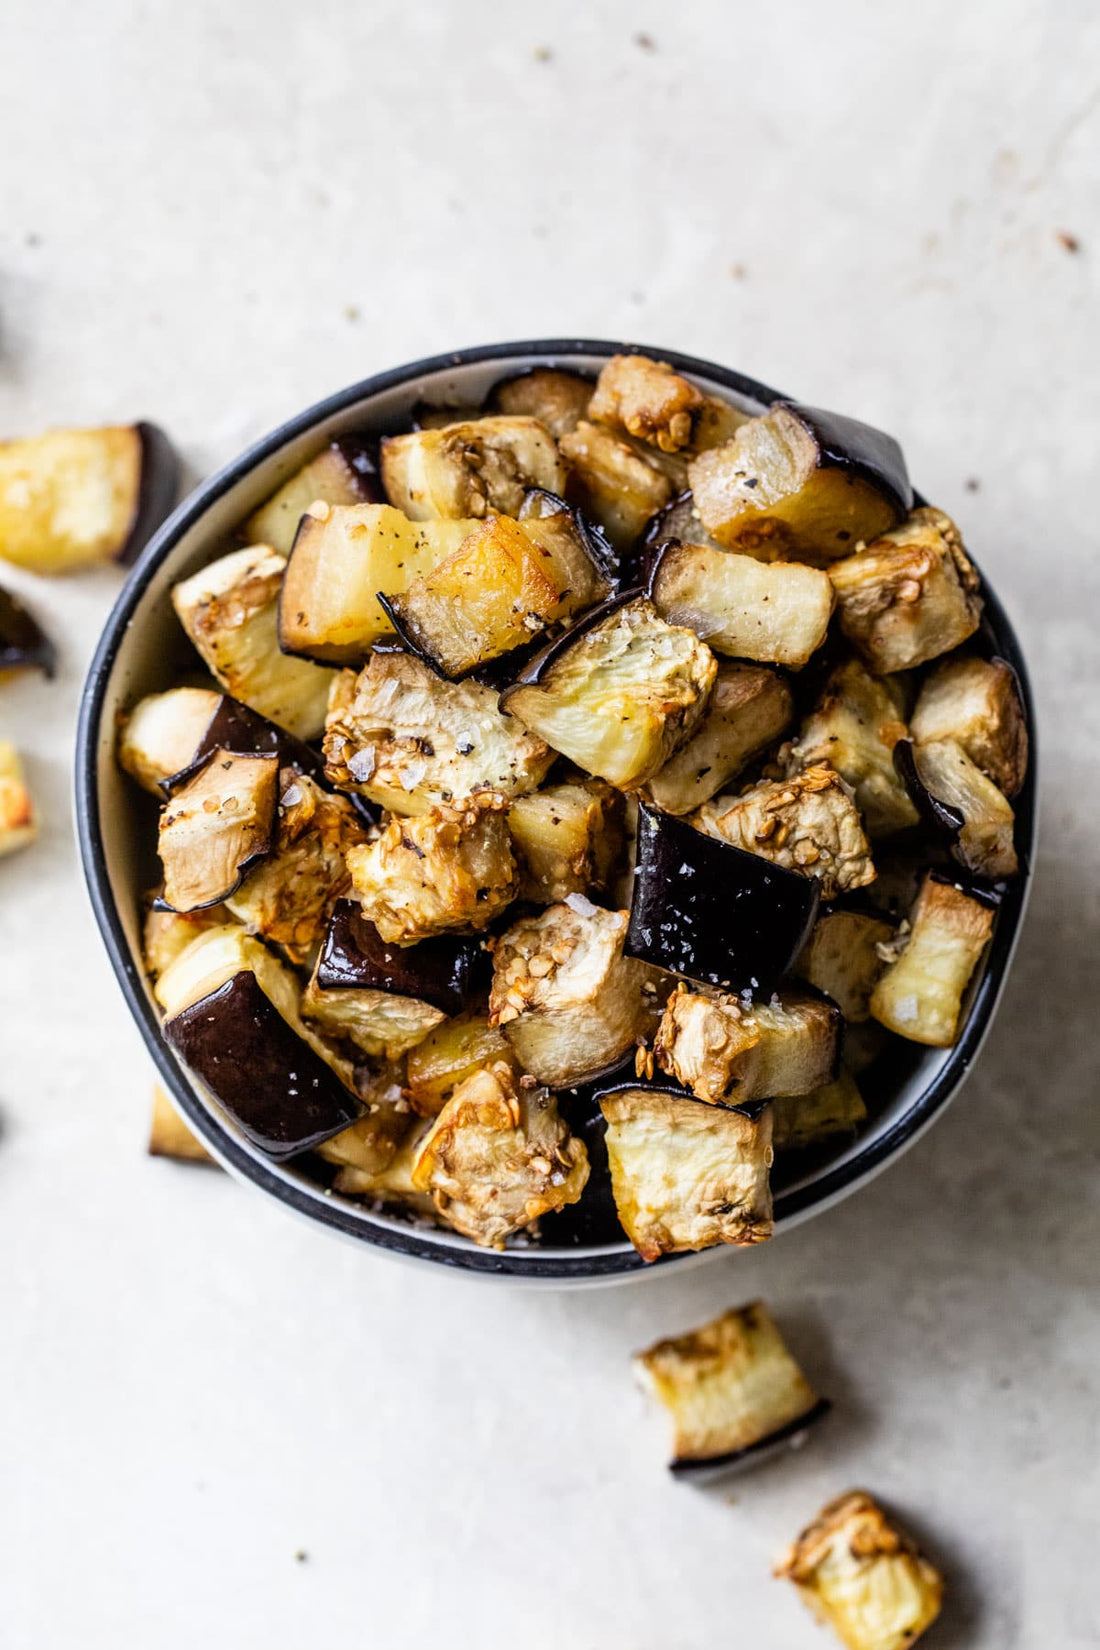 4 Ingredient Roasted Eggplant—Tender and Caramelized